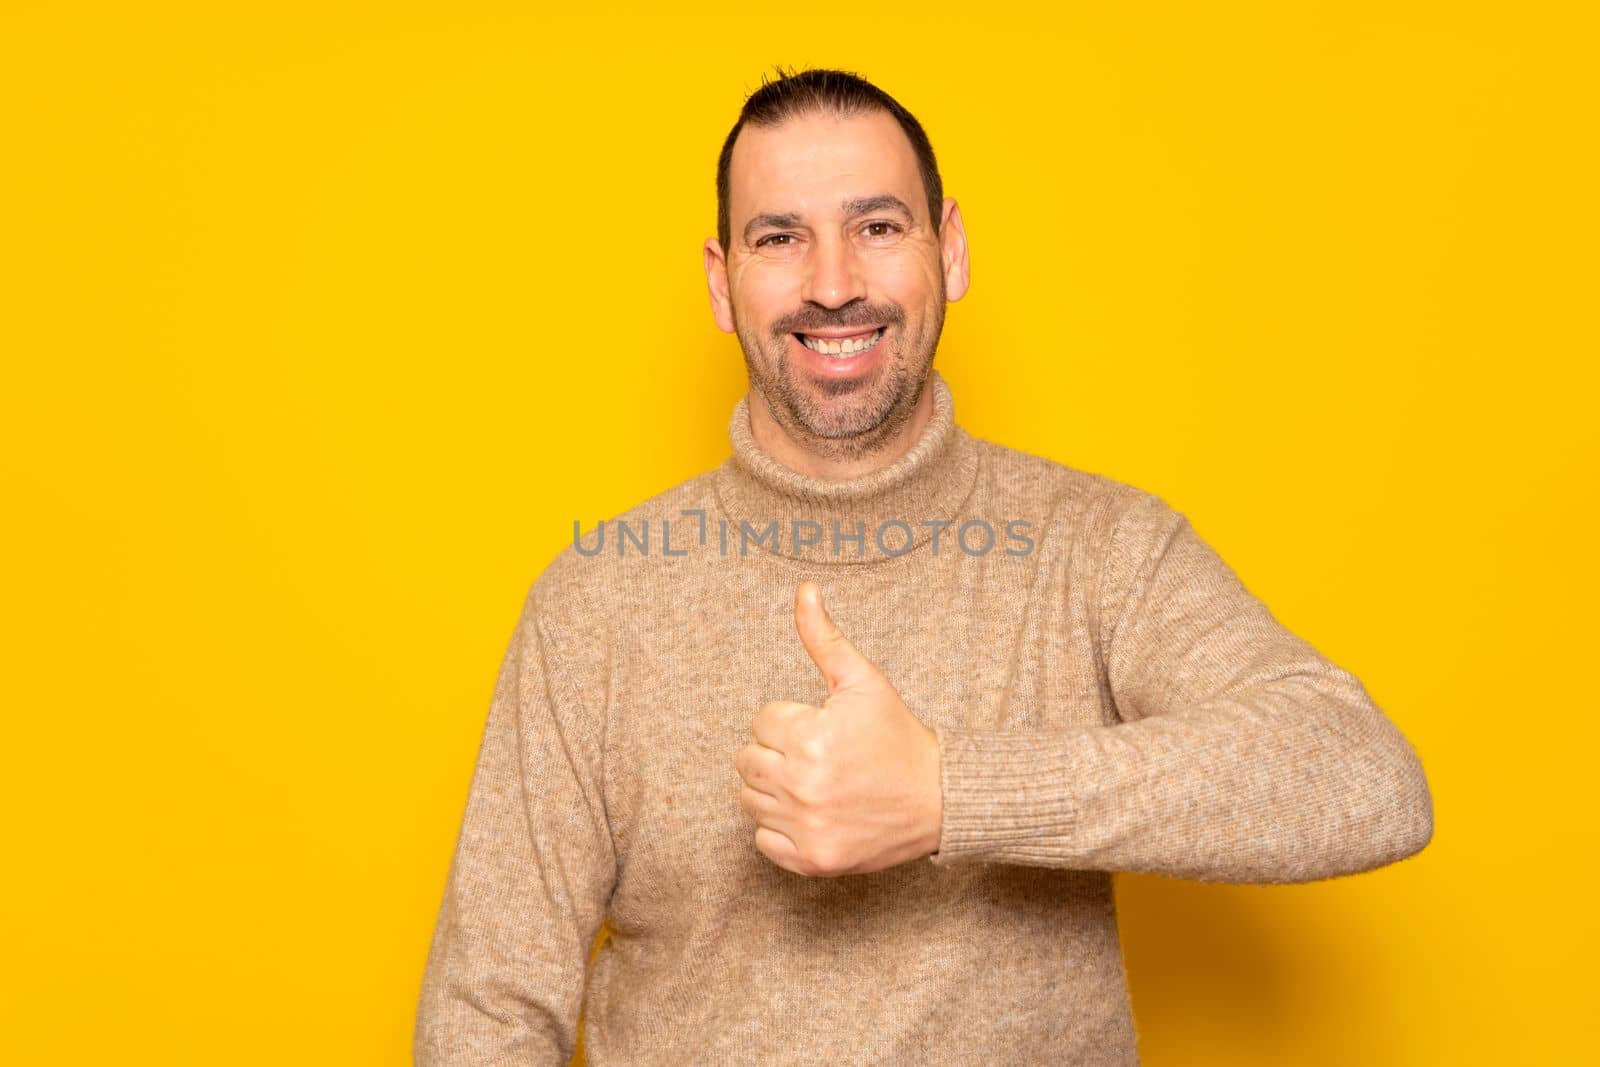 Bearded hispanic man wearing beige turtleneck posing with thumbs up in approval and self-confidence isolated over yellow background. Concept of success and positivism. by Barriolo82